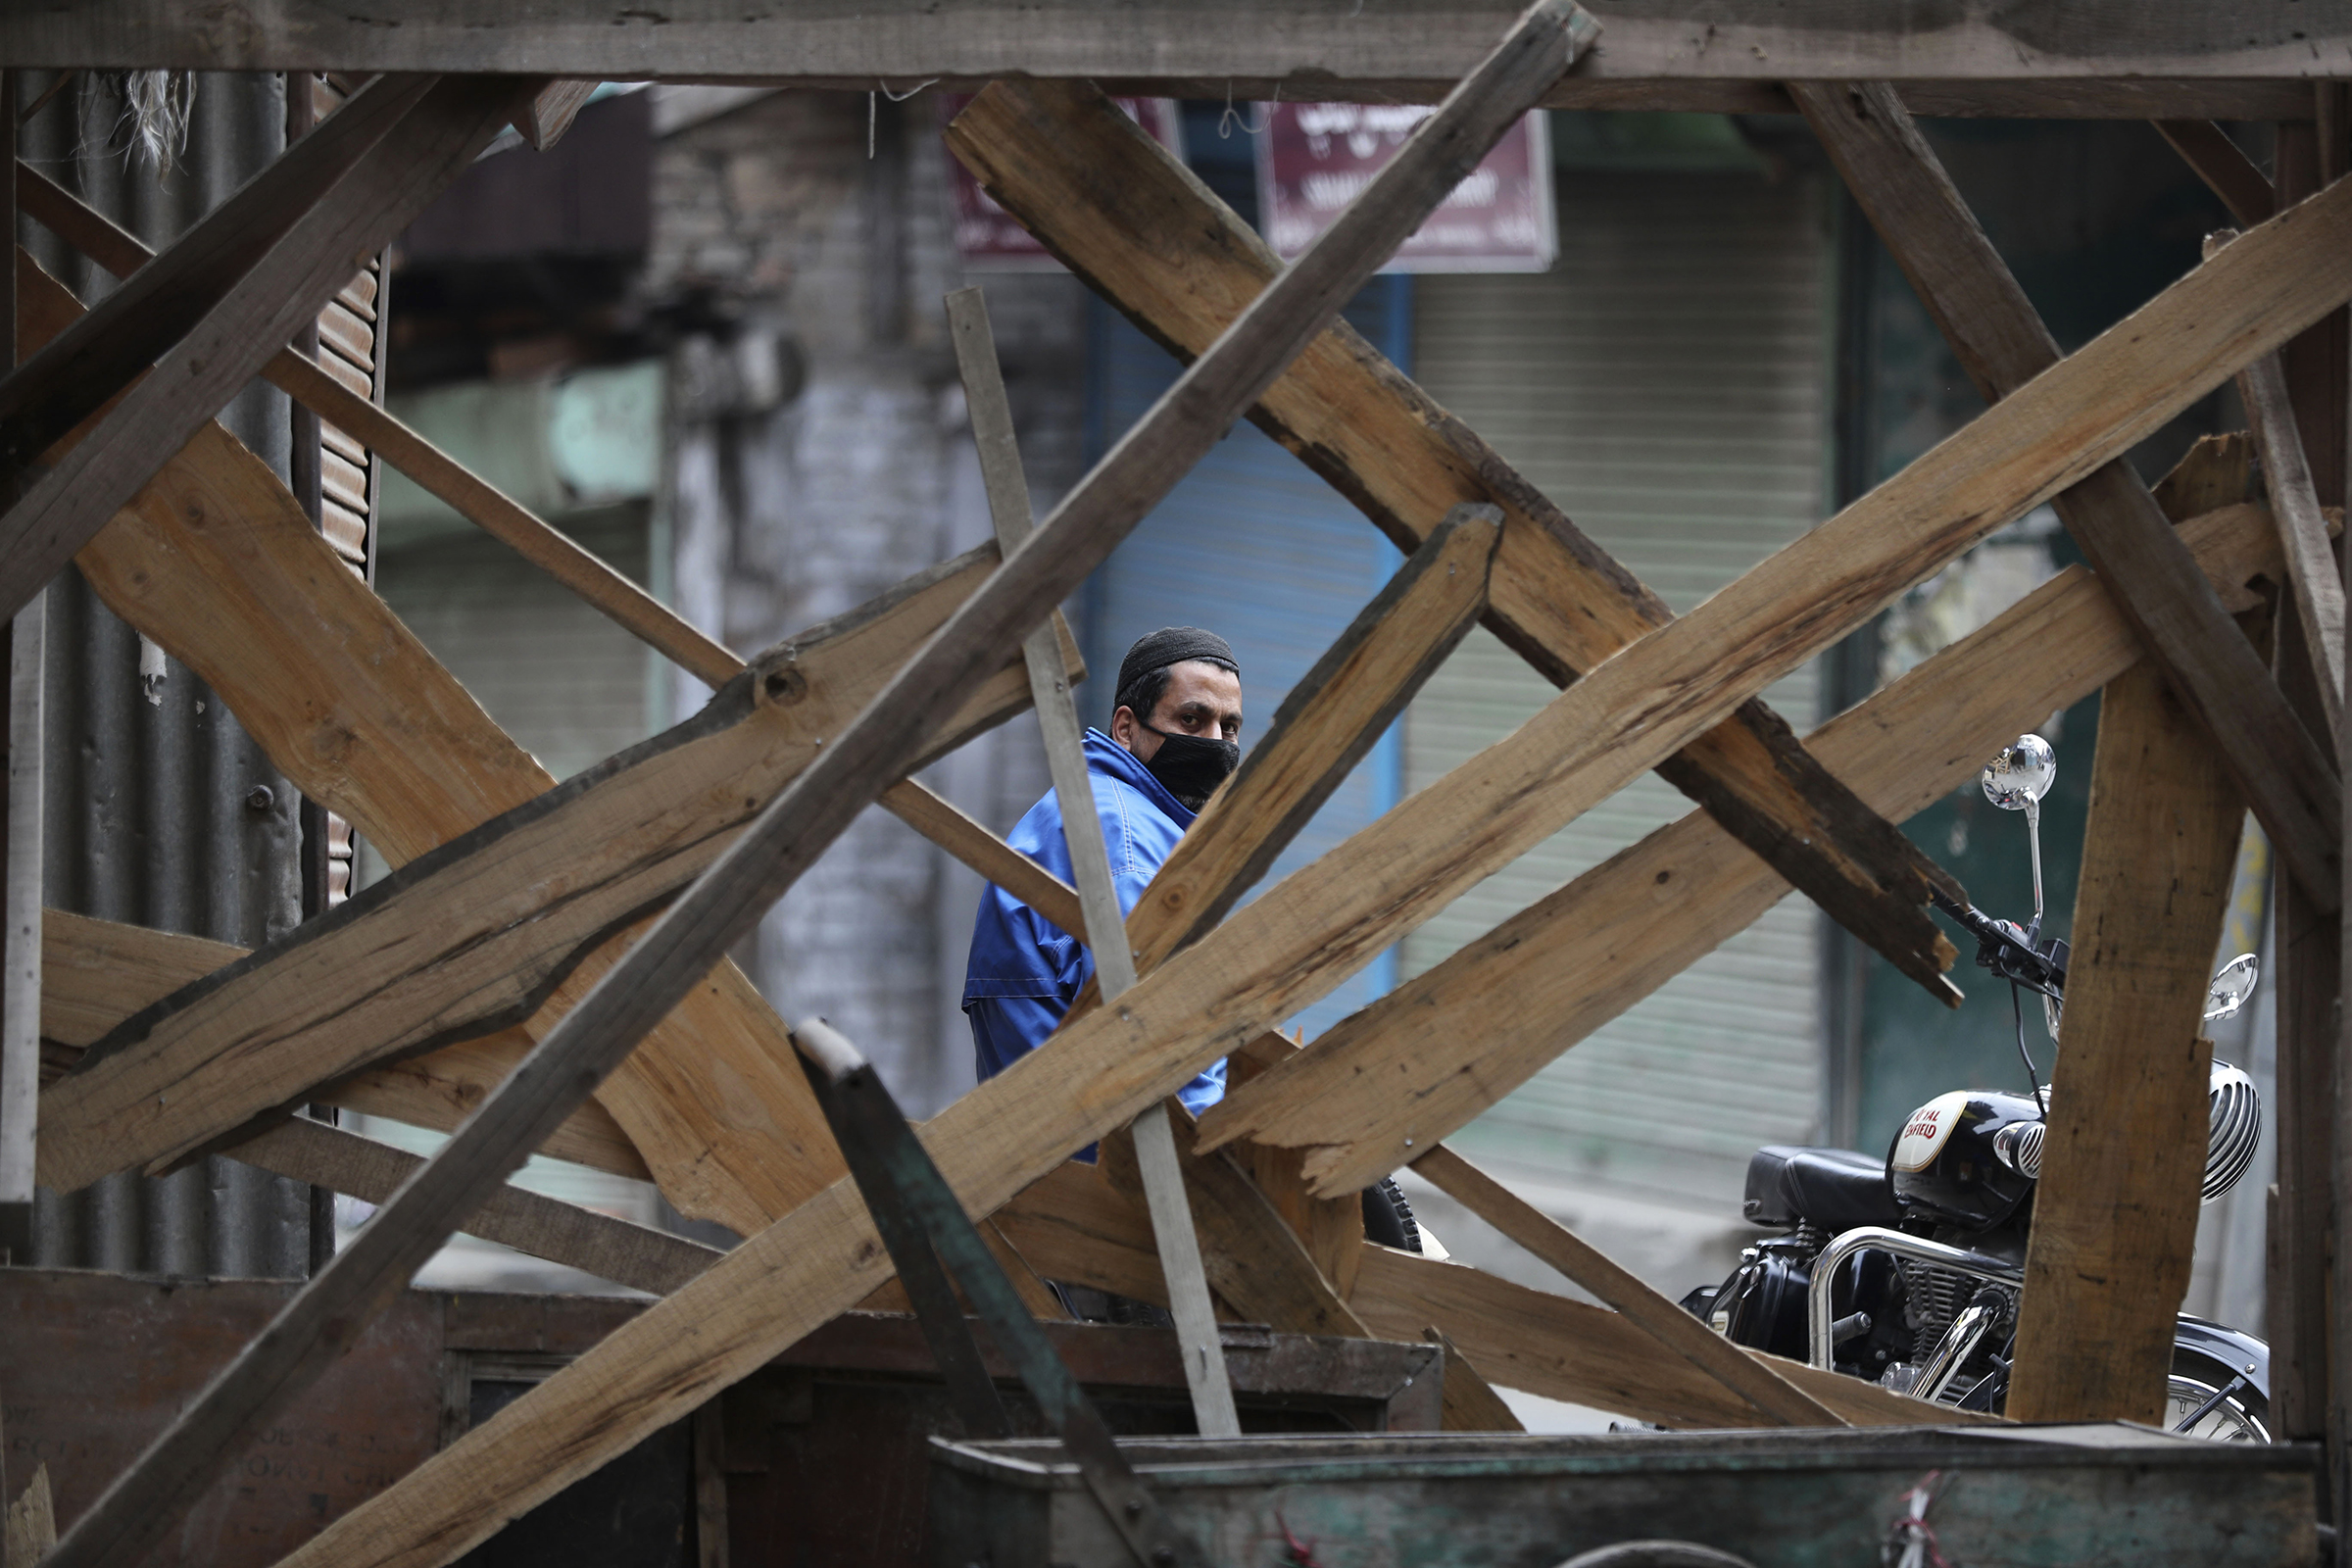 A Kashmiri volunteer looks through temporary barricades erected to prevent outsiders from entering an area declared as red zone by the government during lockdown in Srinagar, Indian controlled Kashmir, on April 14, 2020. (Mukhtar Khan—AP)